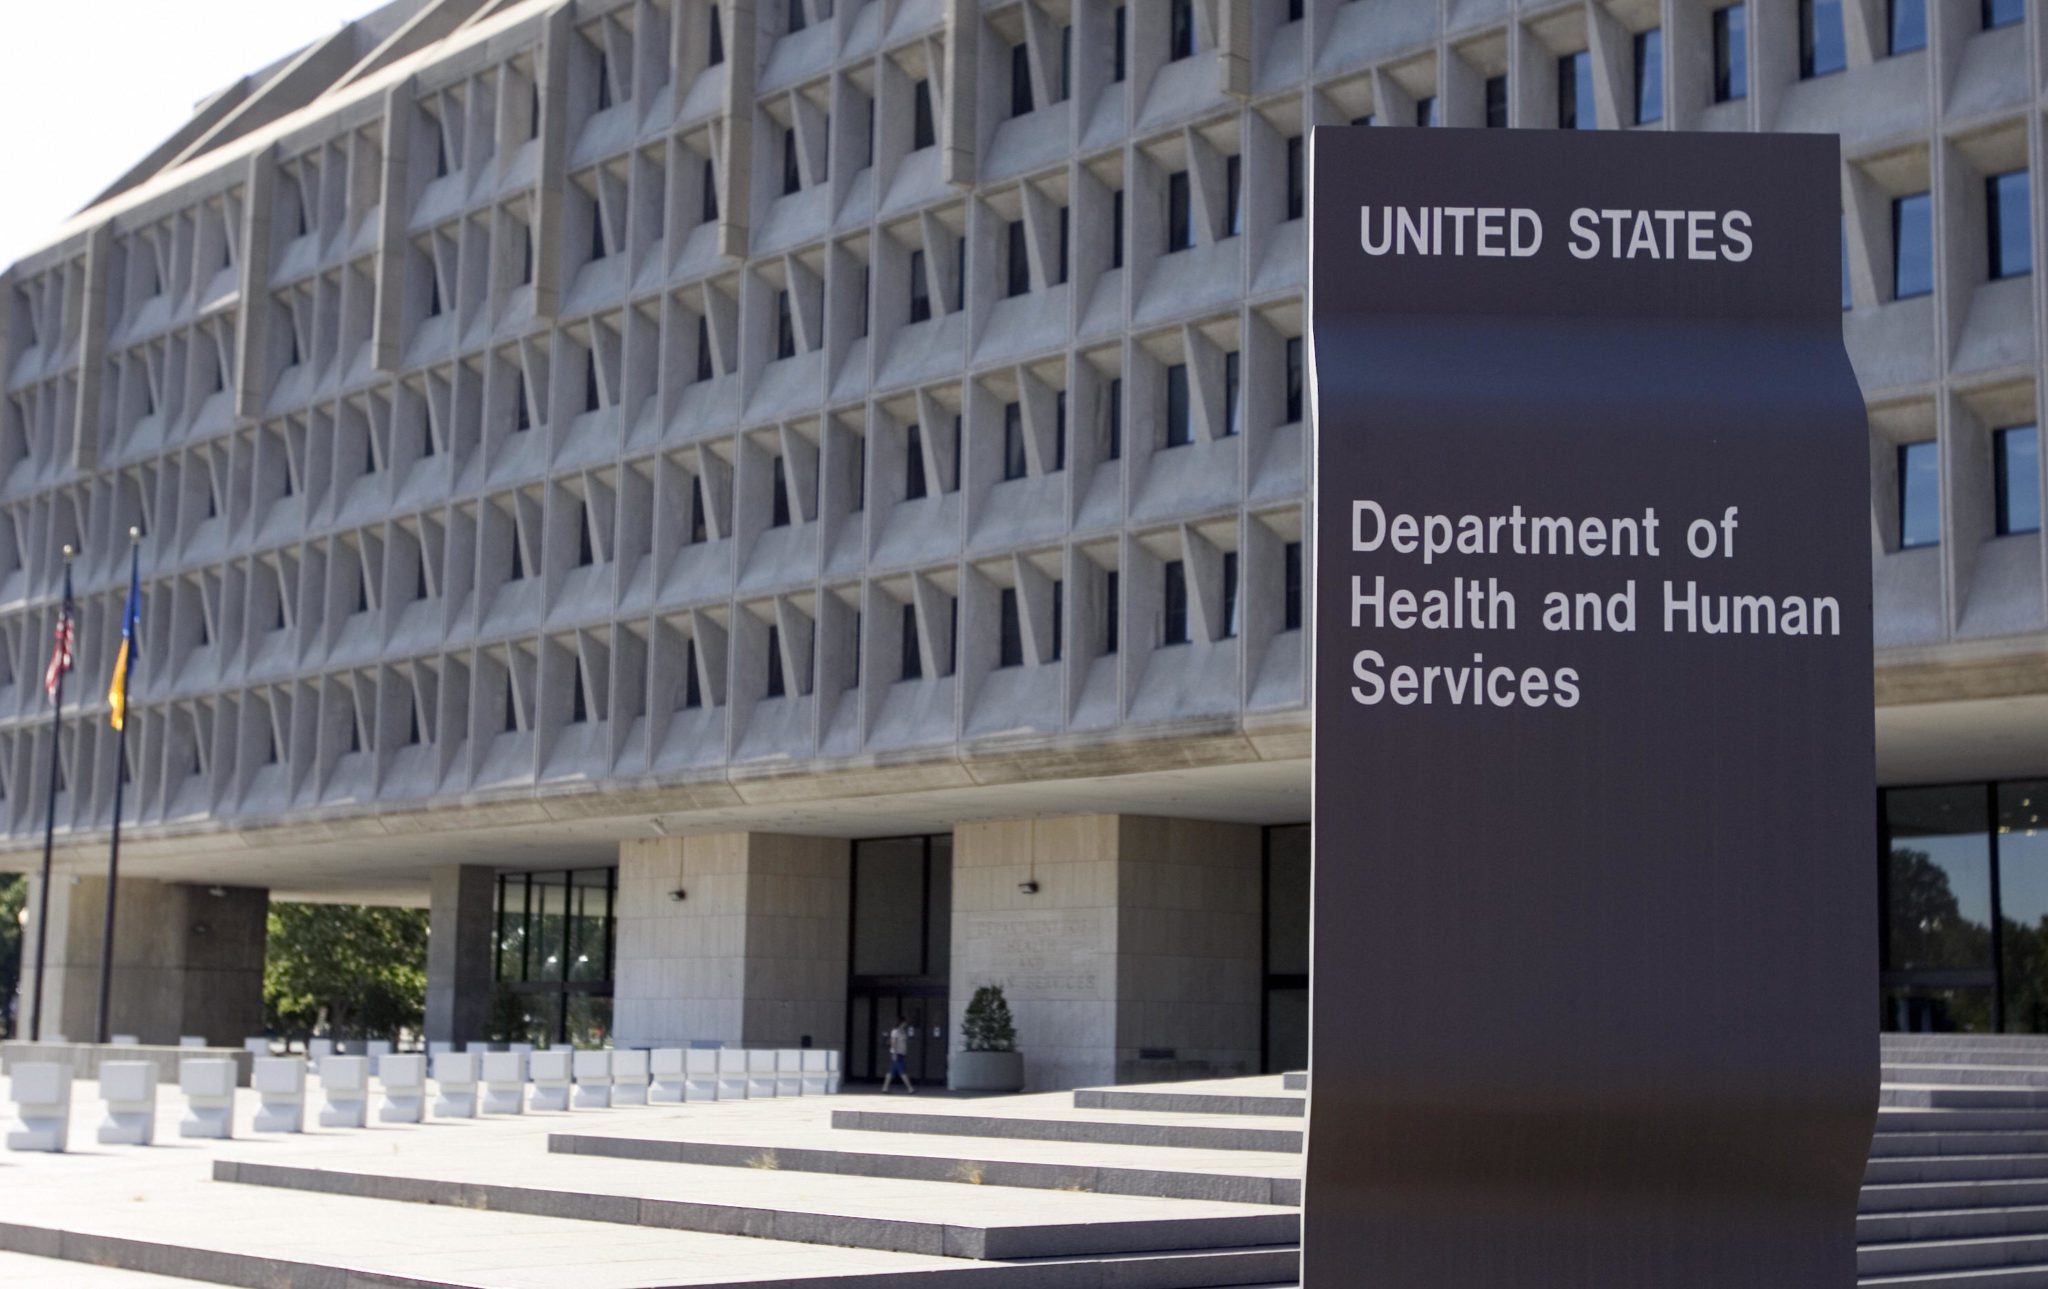 United States Department of Health and Human Services building